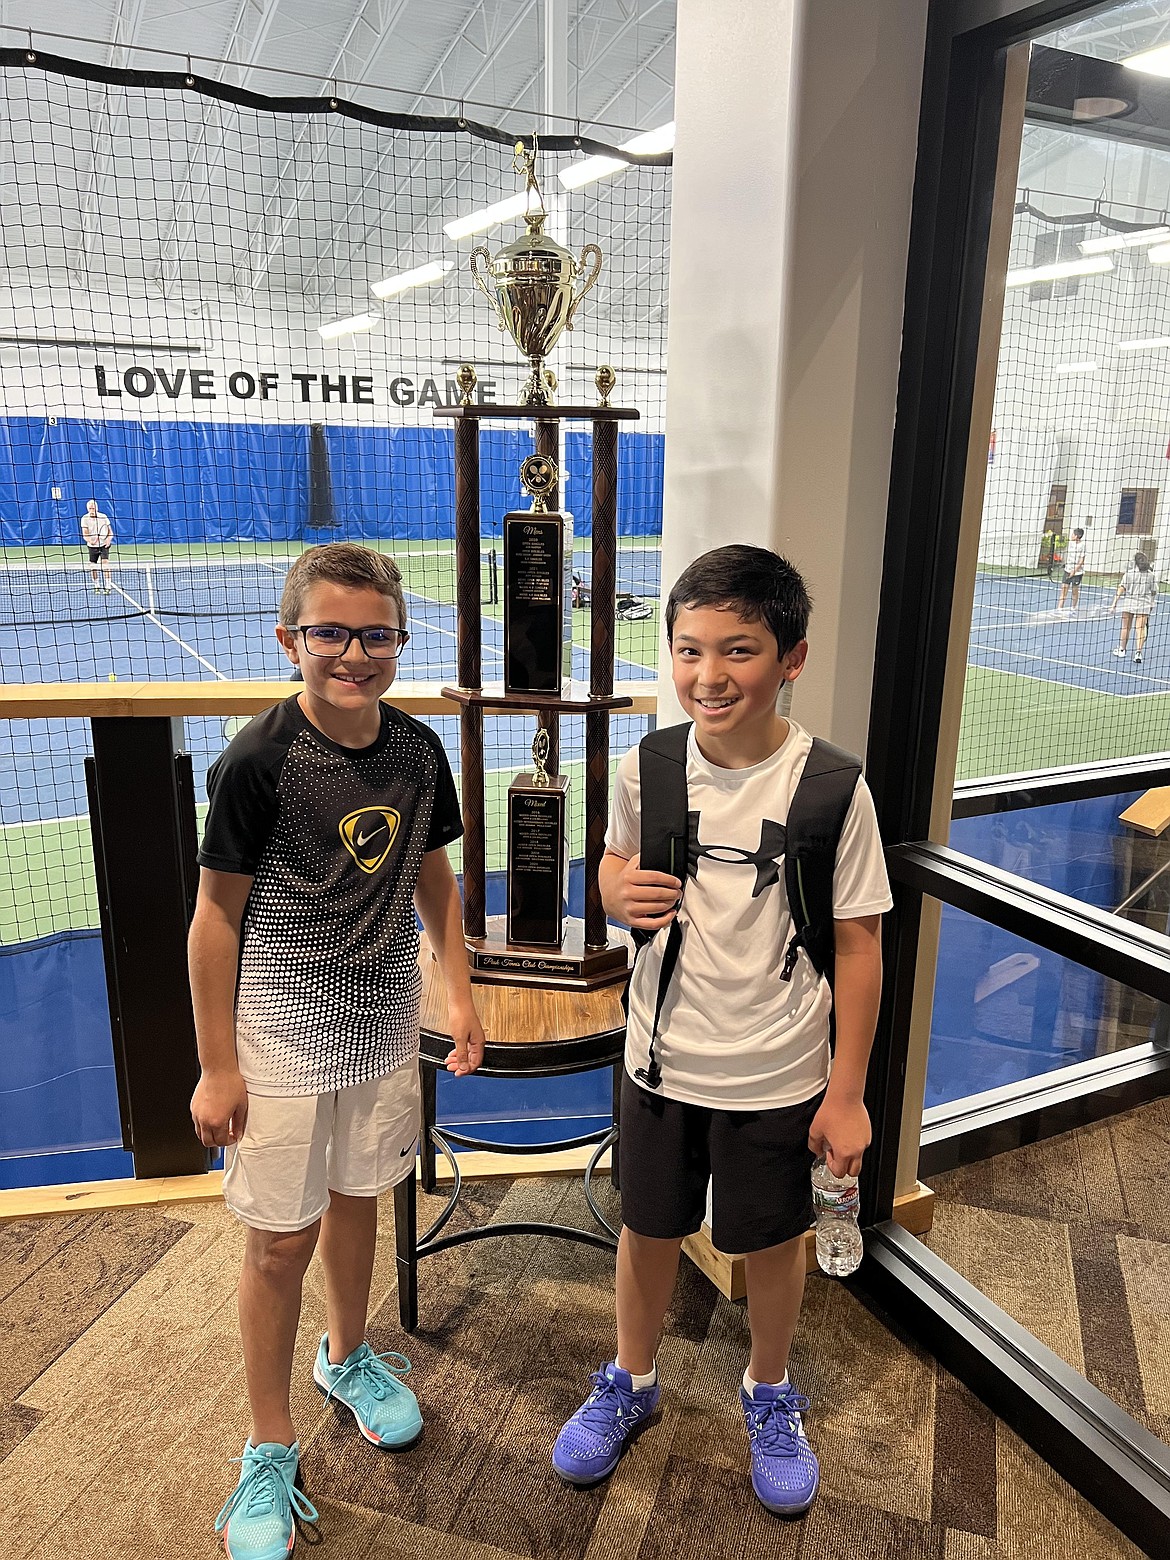 Courtesy photo
The high school doubles champions at the recent Peak Hayden member tennis tournament were, from left, Kolby Johnson and Nathan Freedman.